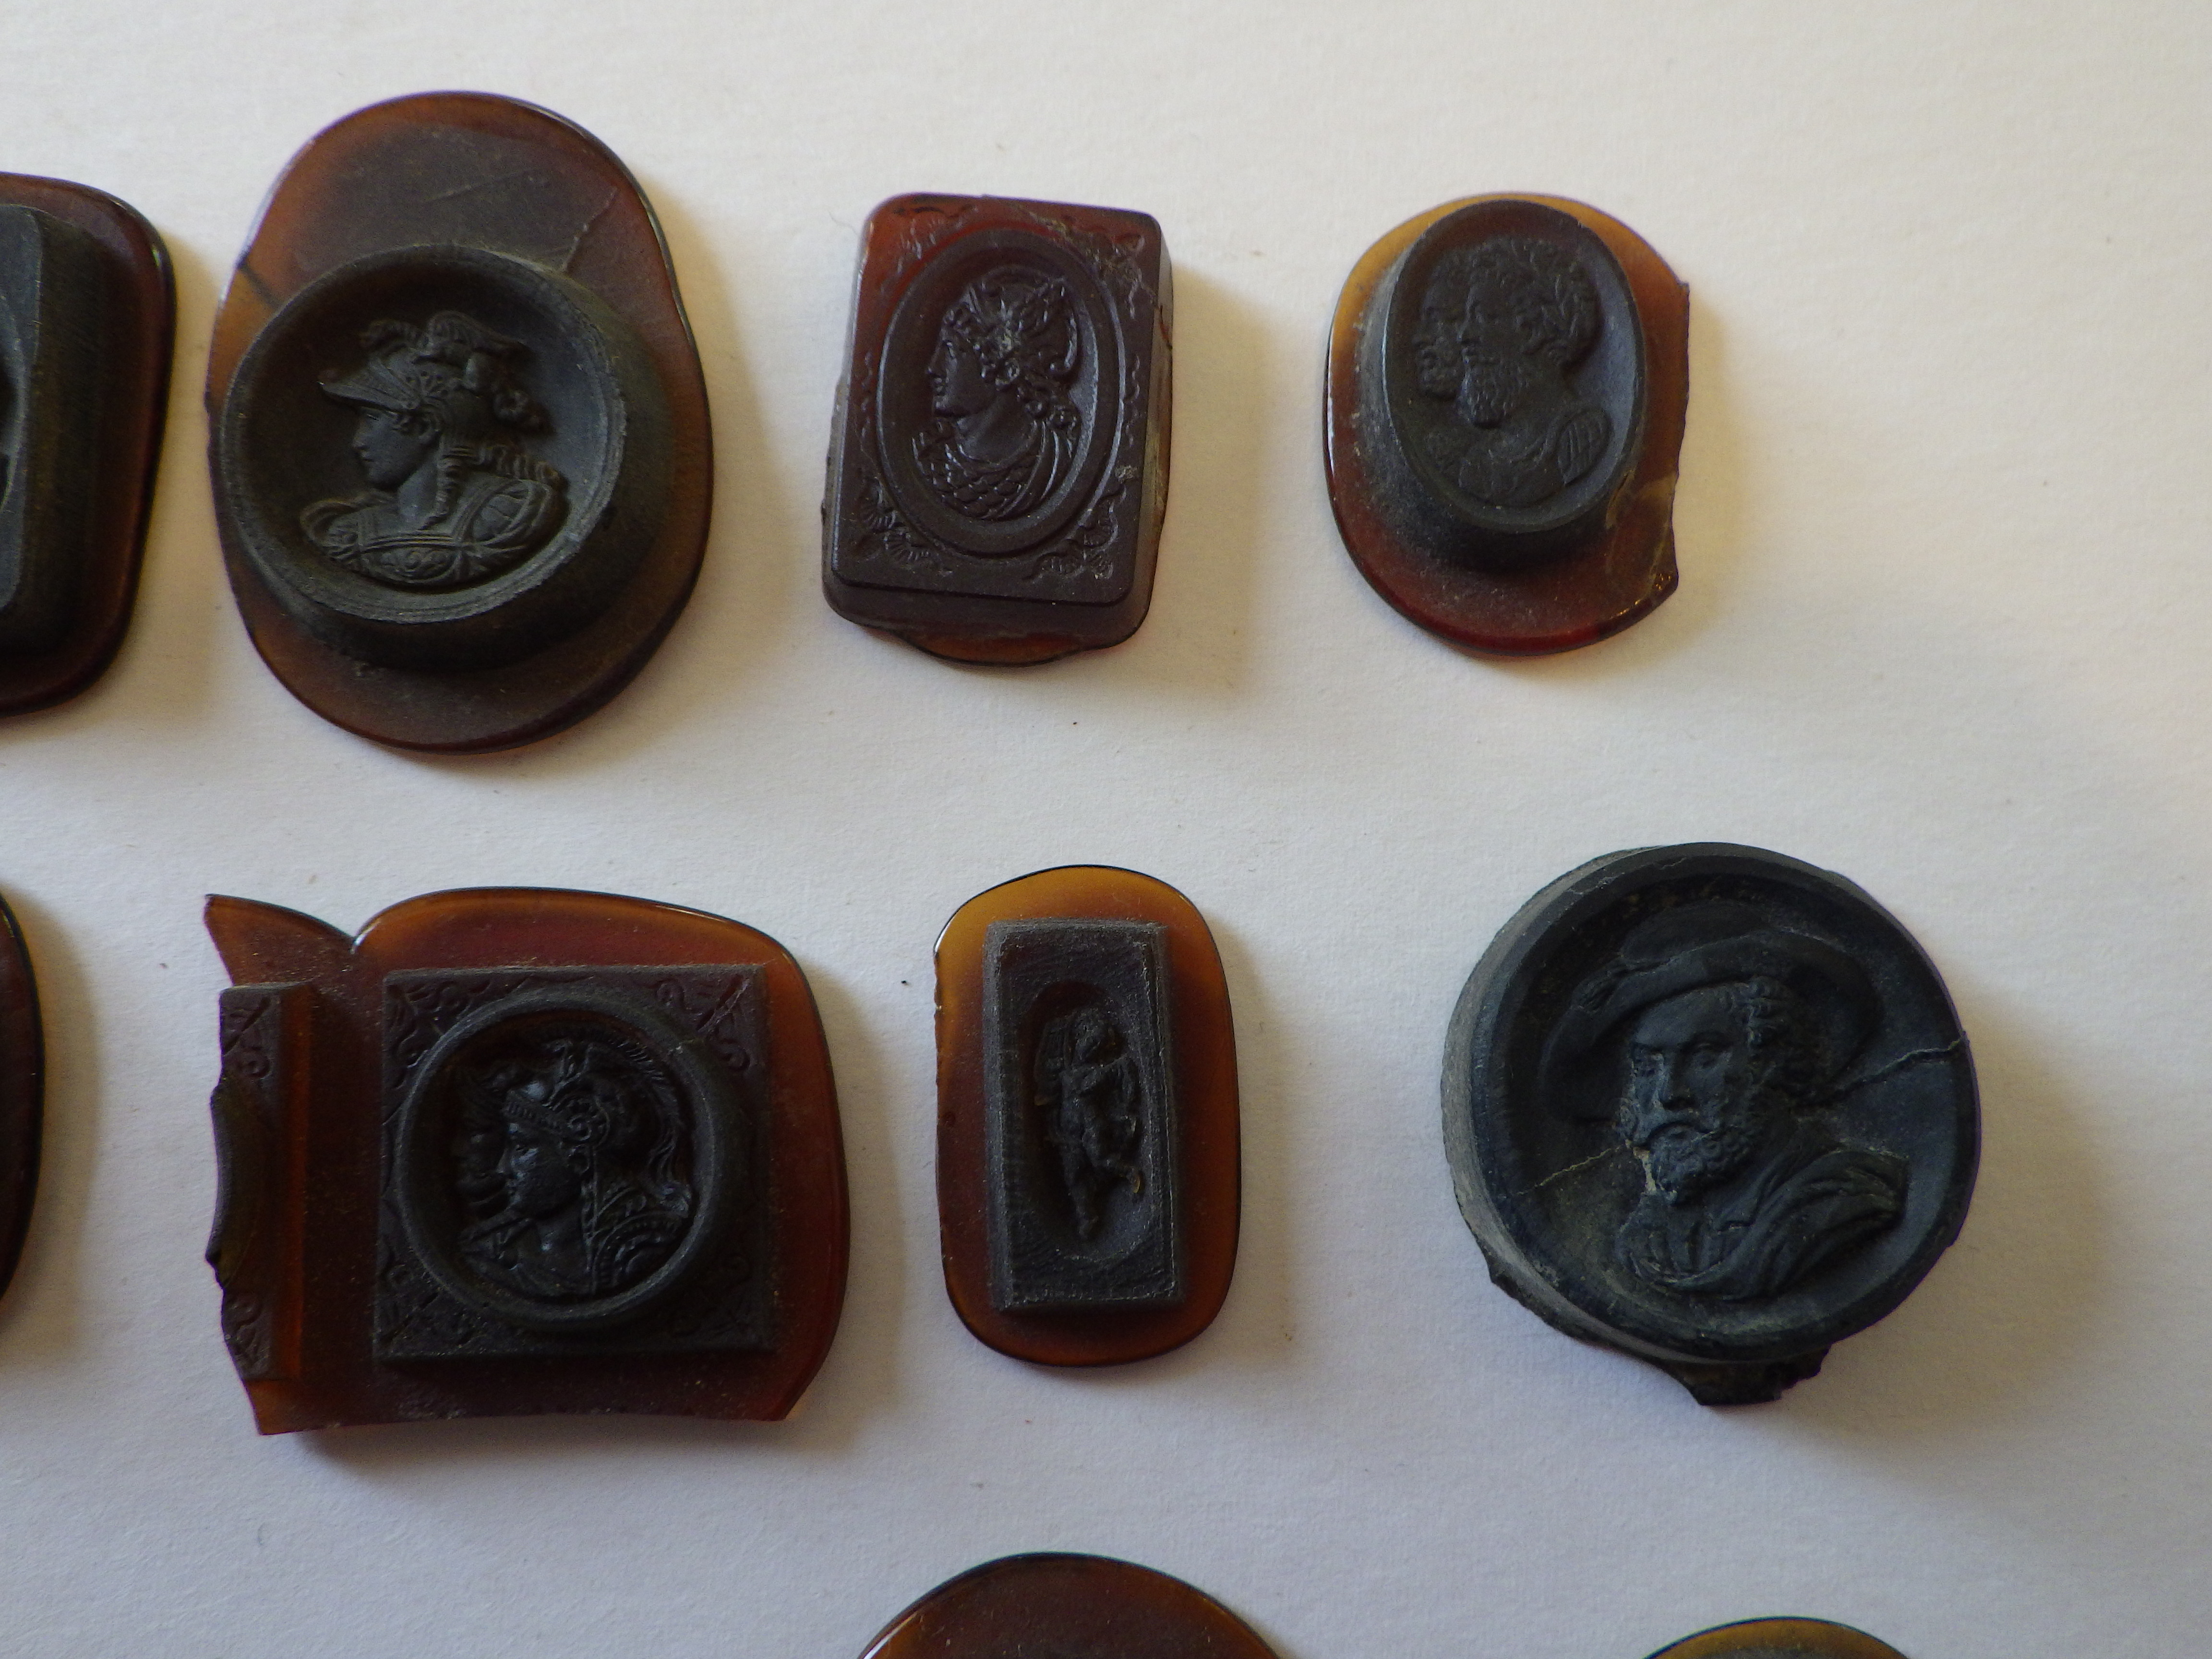 15 c19th French Glass Cameos - Image 4 of 5